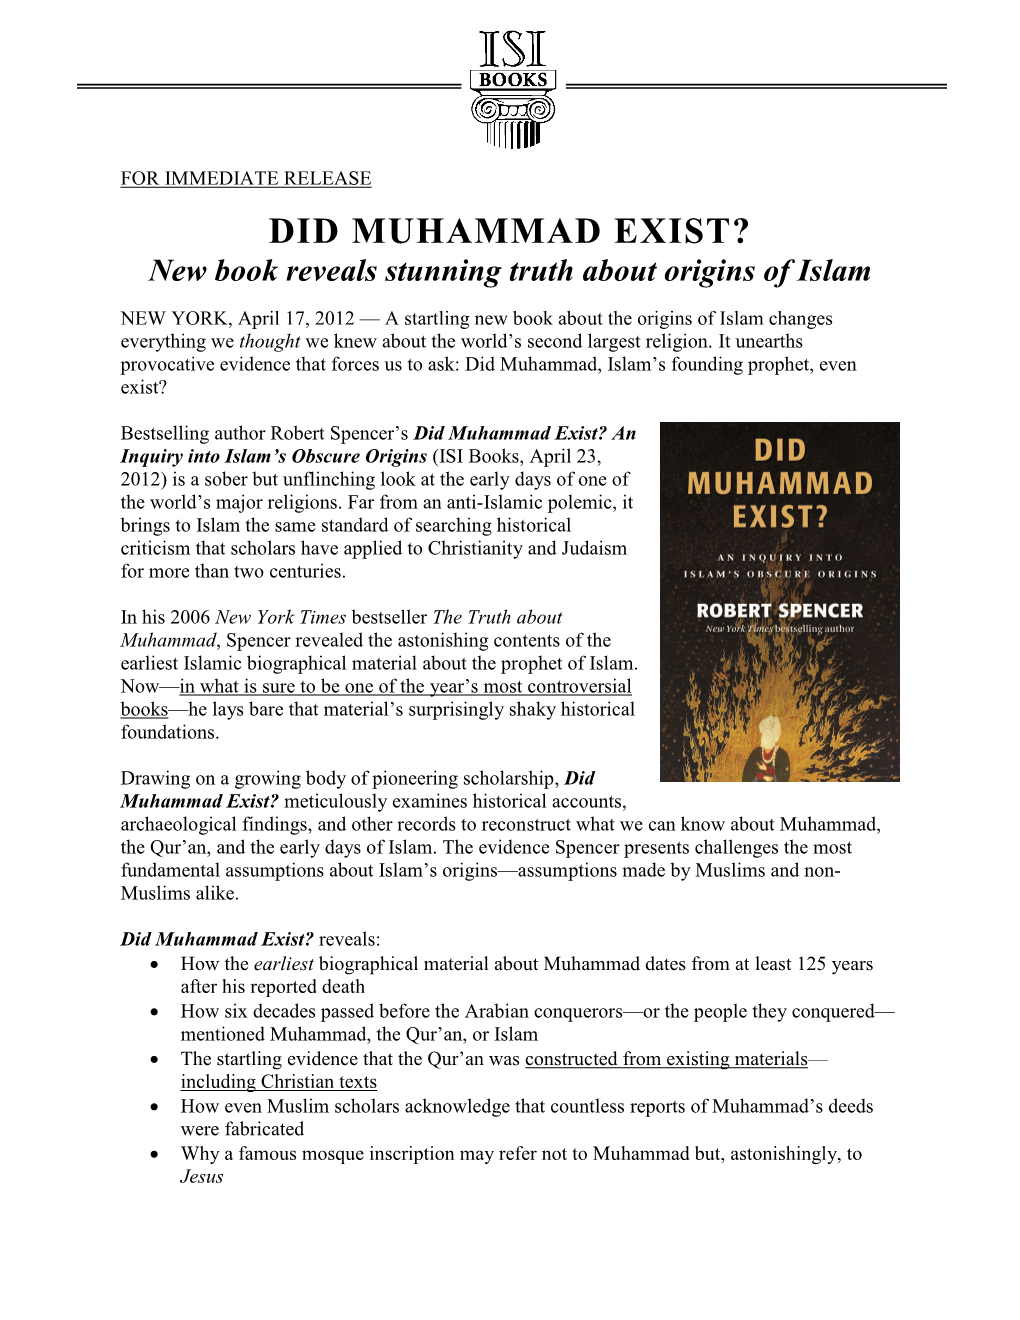 DID MUHAMMAD EXIST? New Book Reveals Stunning Truth About Origins of Islam